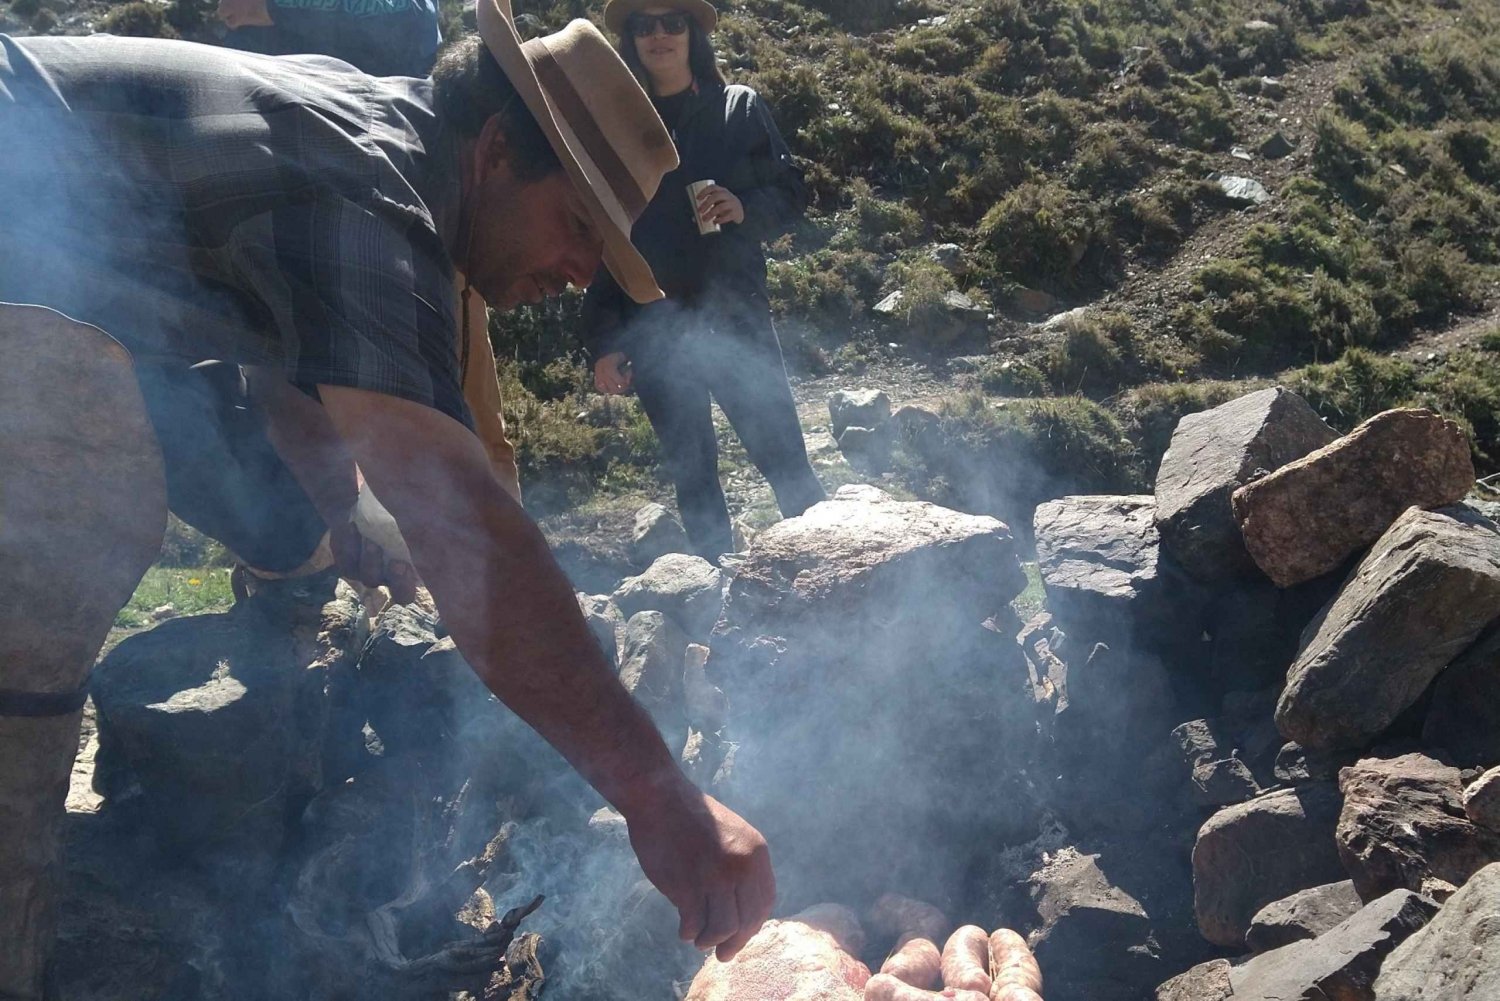 From Mendoza: Trekking and Barbecue in the Andes